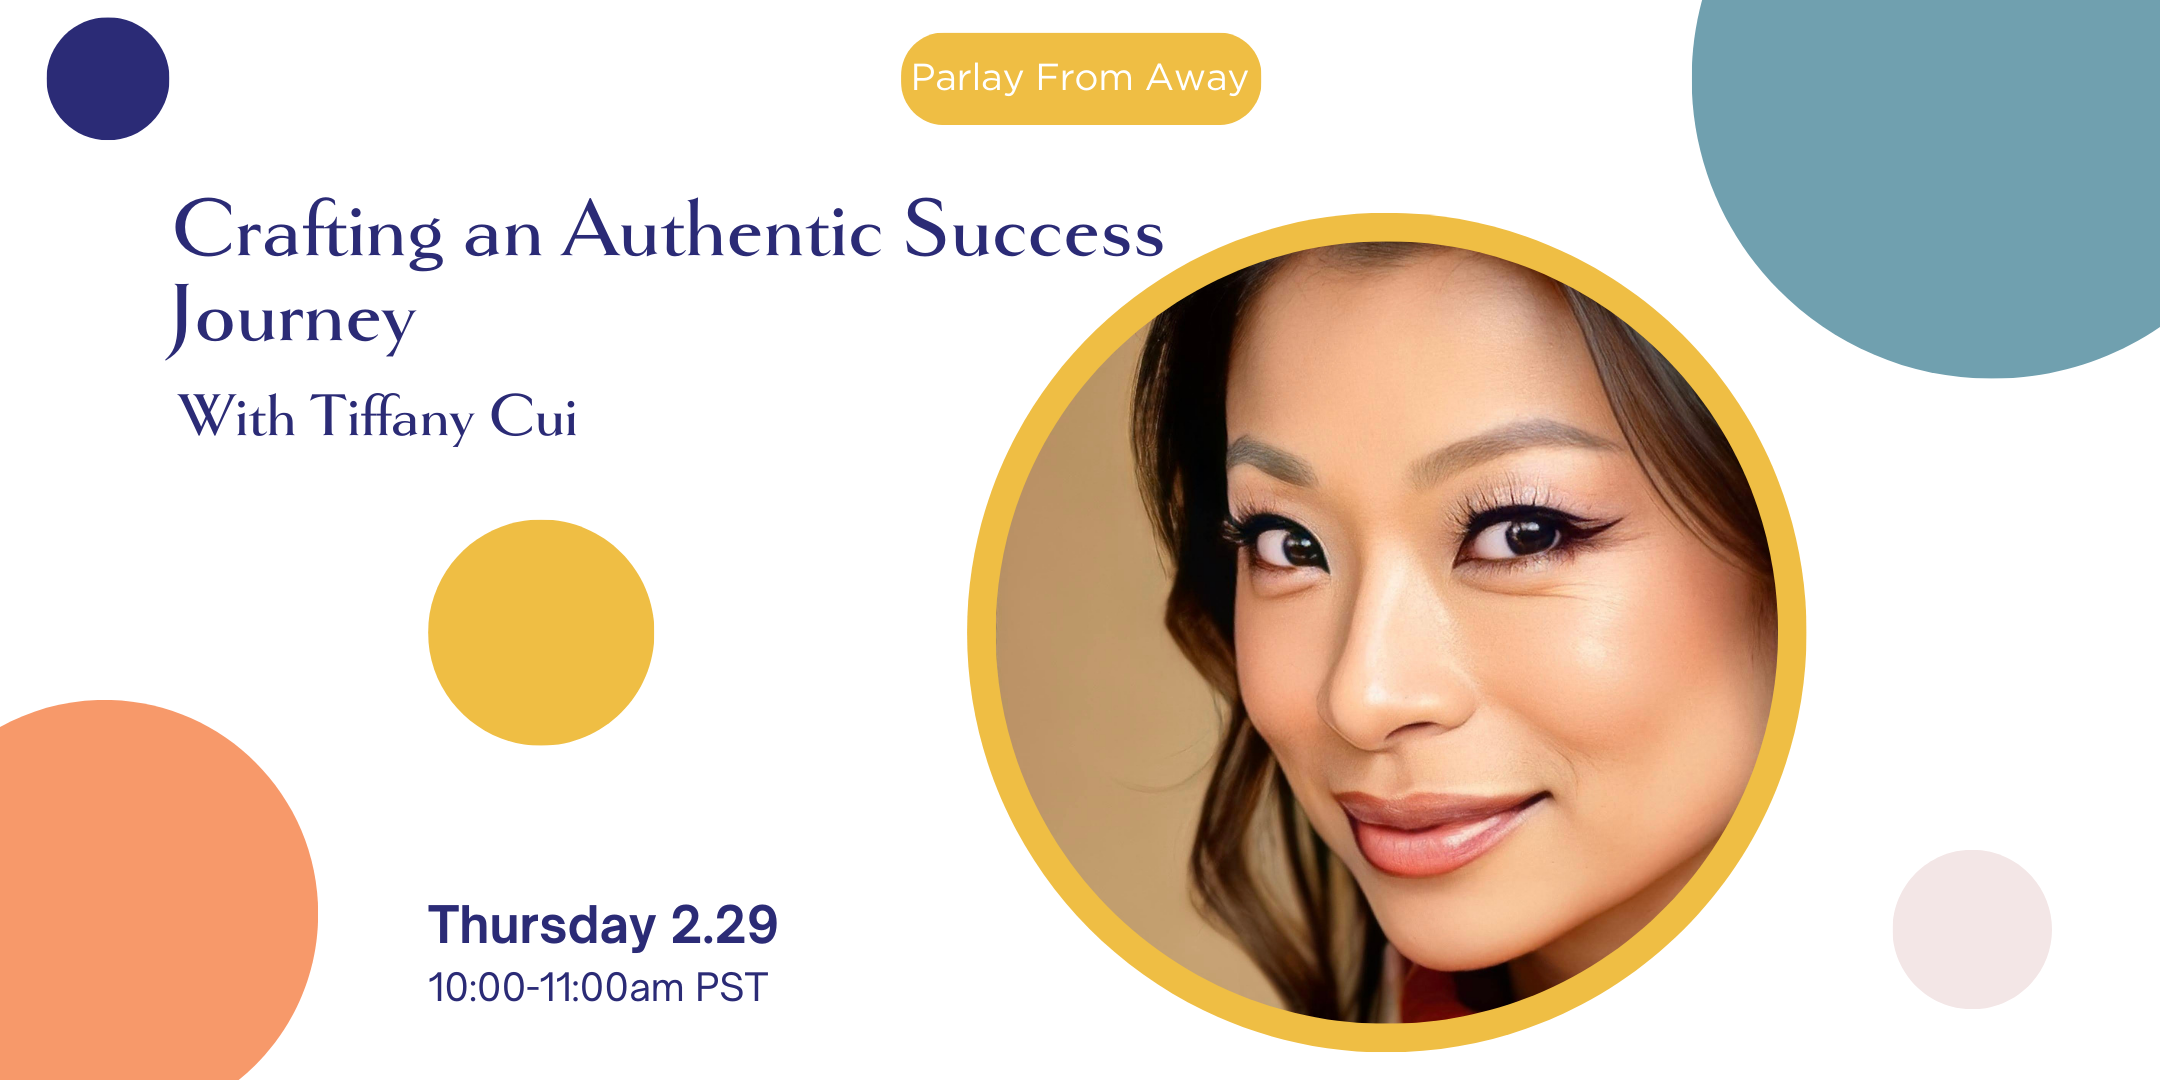 Crafting an Authentic Success Journey